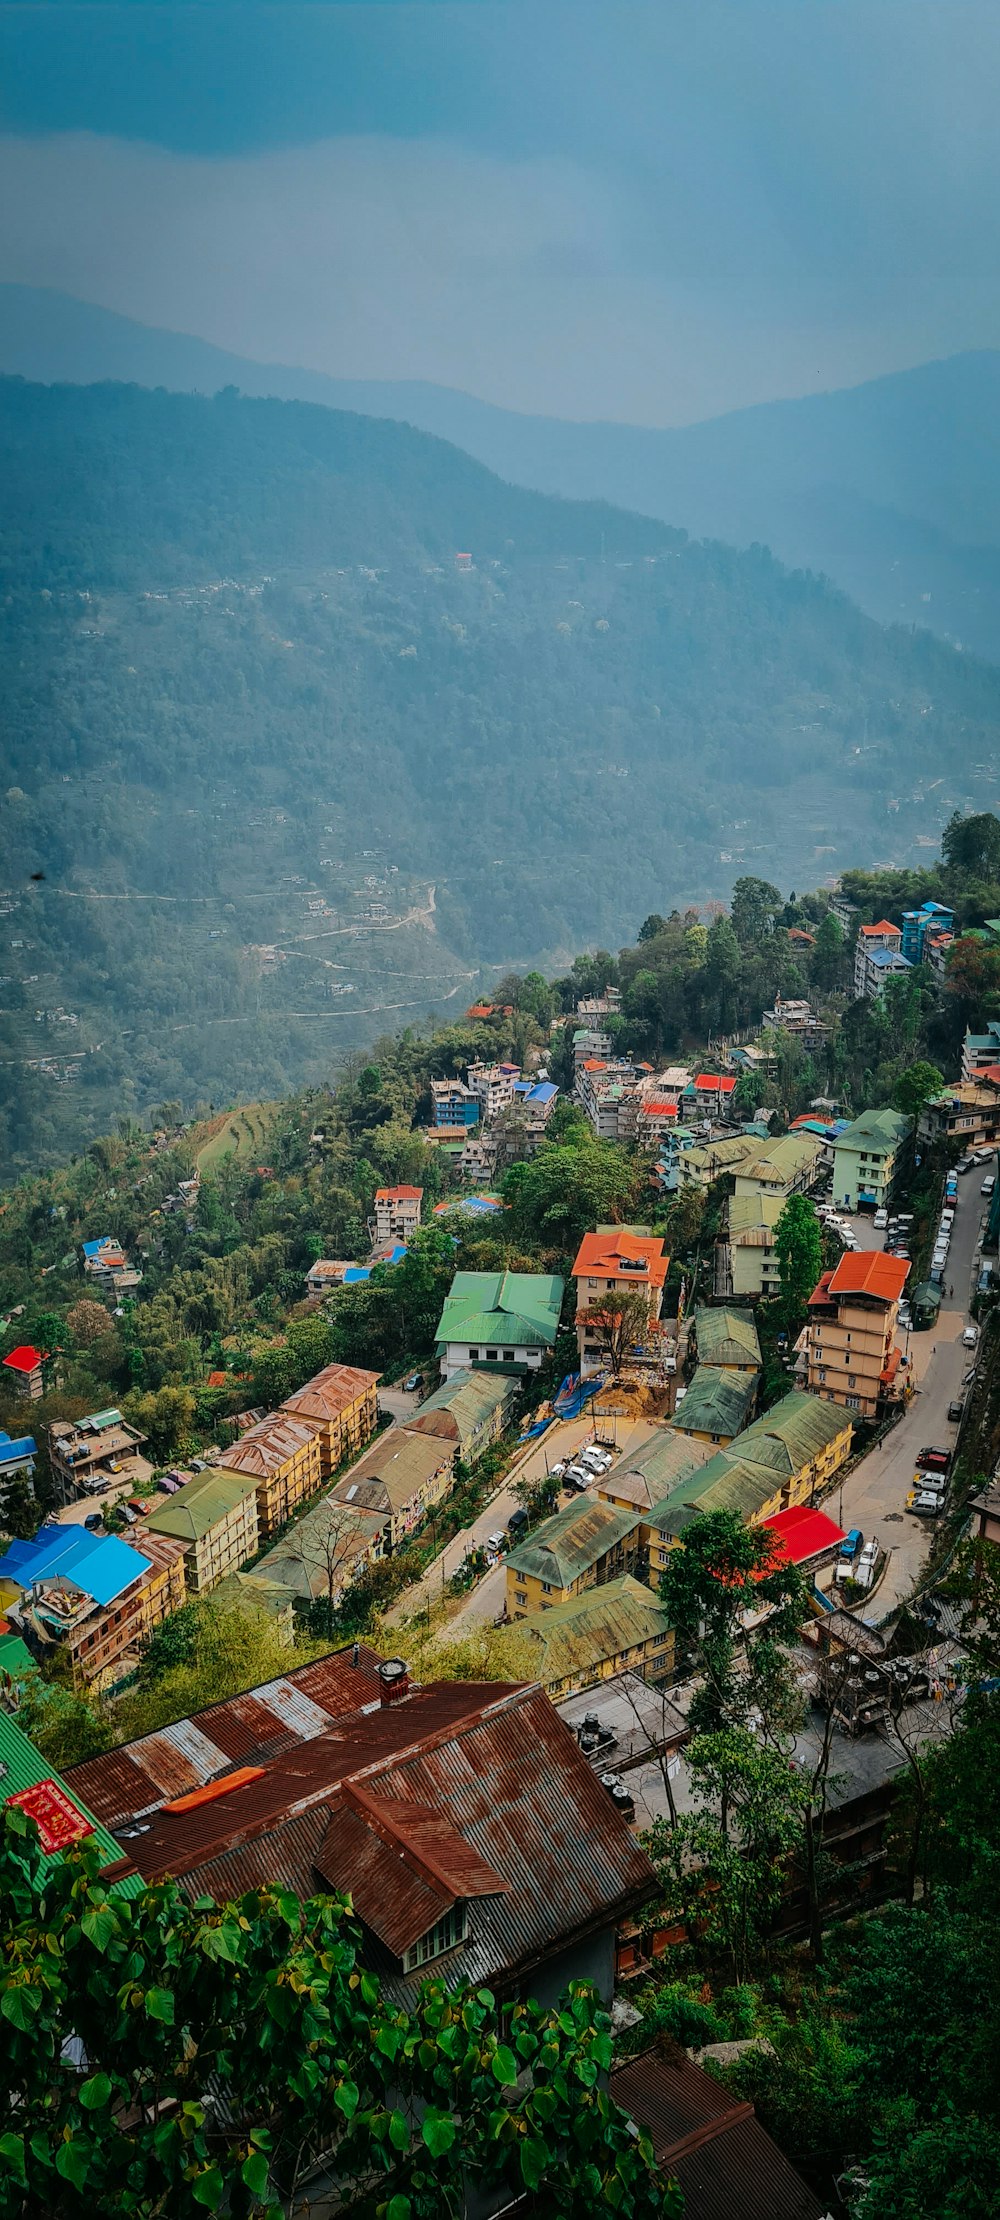 a view of a small town in the mountains